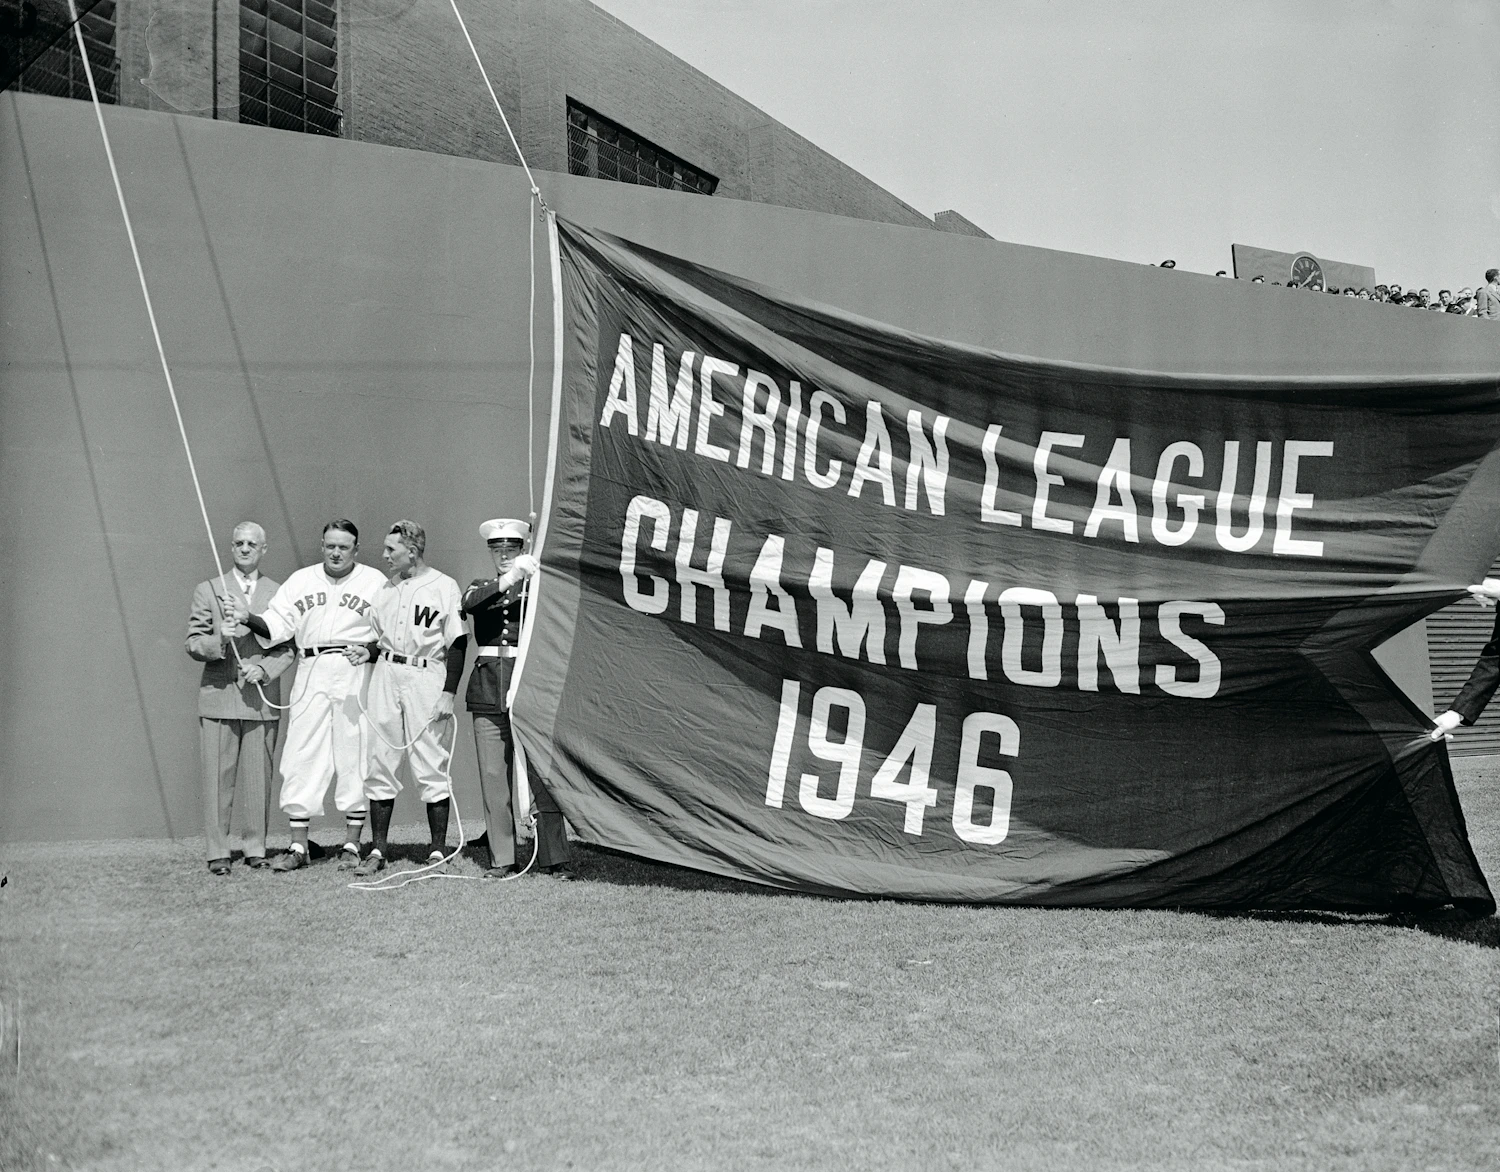 The championship flag that the Red Sox, who had won the American League in 1946, had hoisted. The sale of pennants inspired by this flag was the beginning of the ’47 brand